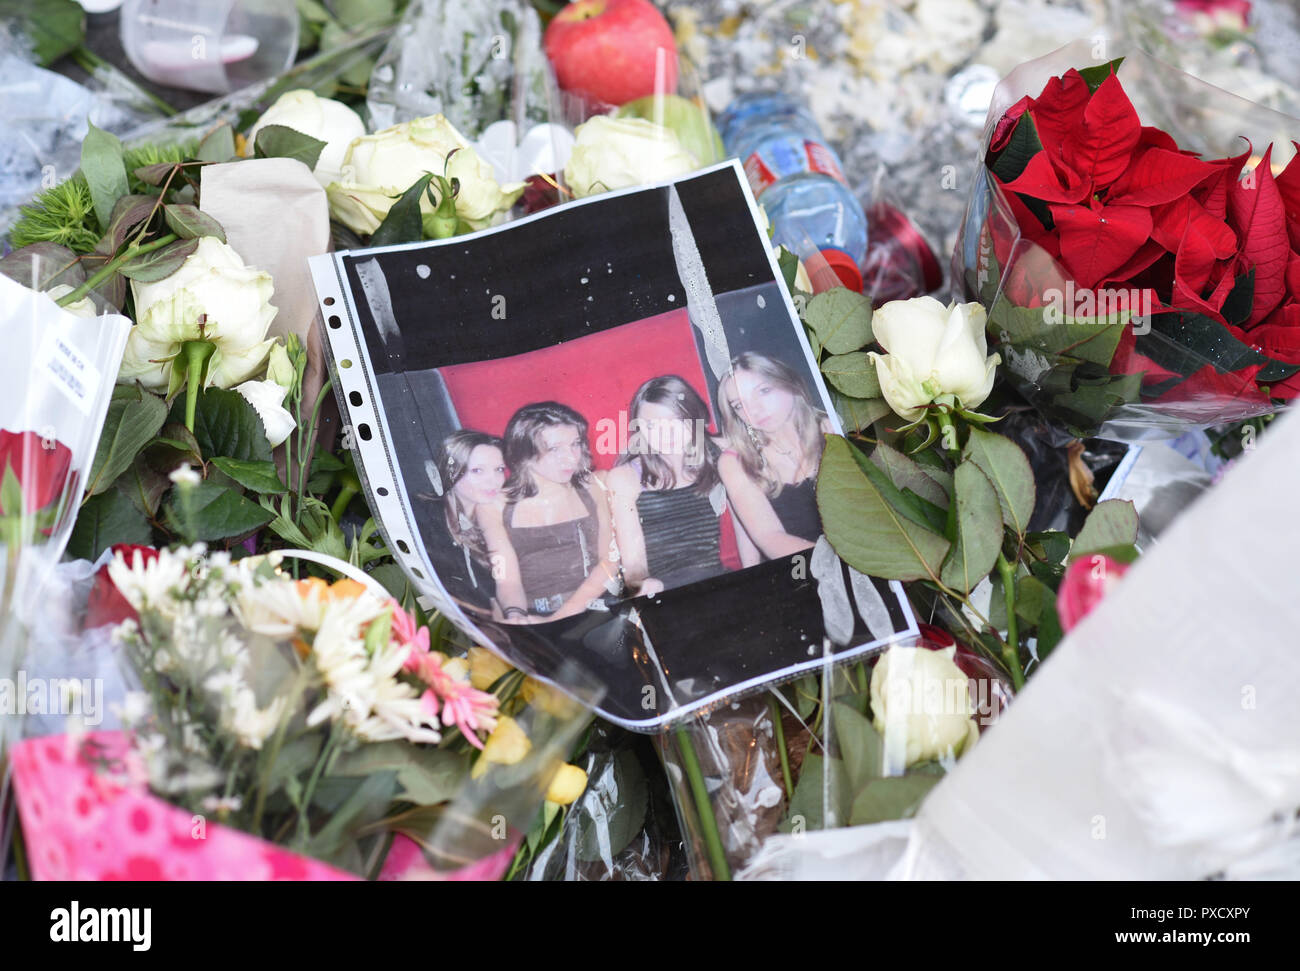 November 22, 2015 - Paris, France: People pay tribute to the victims of the November 13 terror attacks with candles, drawings, street arts, and pictures of the dead with impromptu memorial near the Carillon bar and the Petit Cambodge restaurant. Des photos des victimes des attaques terroristes du 13 novembre 2015 sont posees au milieu de fleurs le long d'un memorial improvise pres du bar Le Carillon. *** FRANCE OUT / NO SALES TO FRENCH MEDIA *** Stock Photo